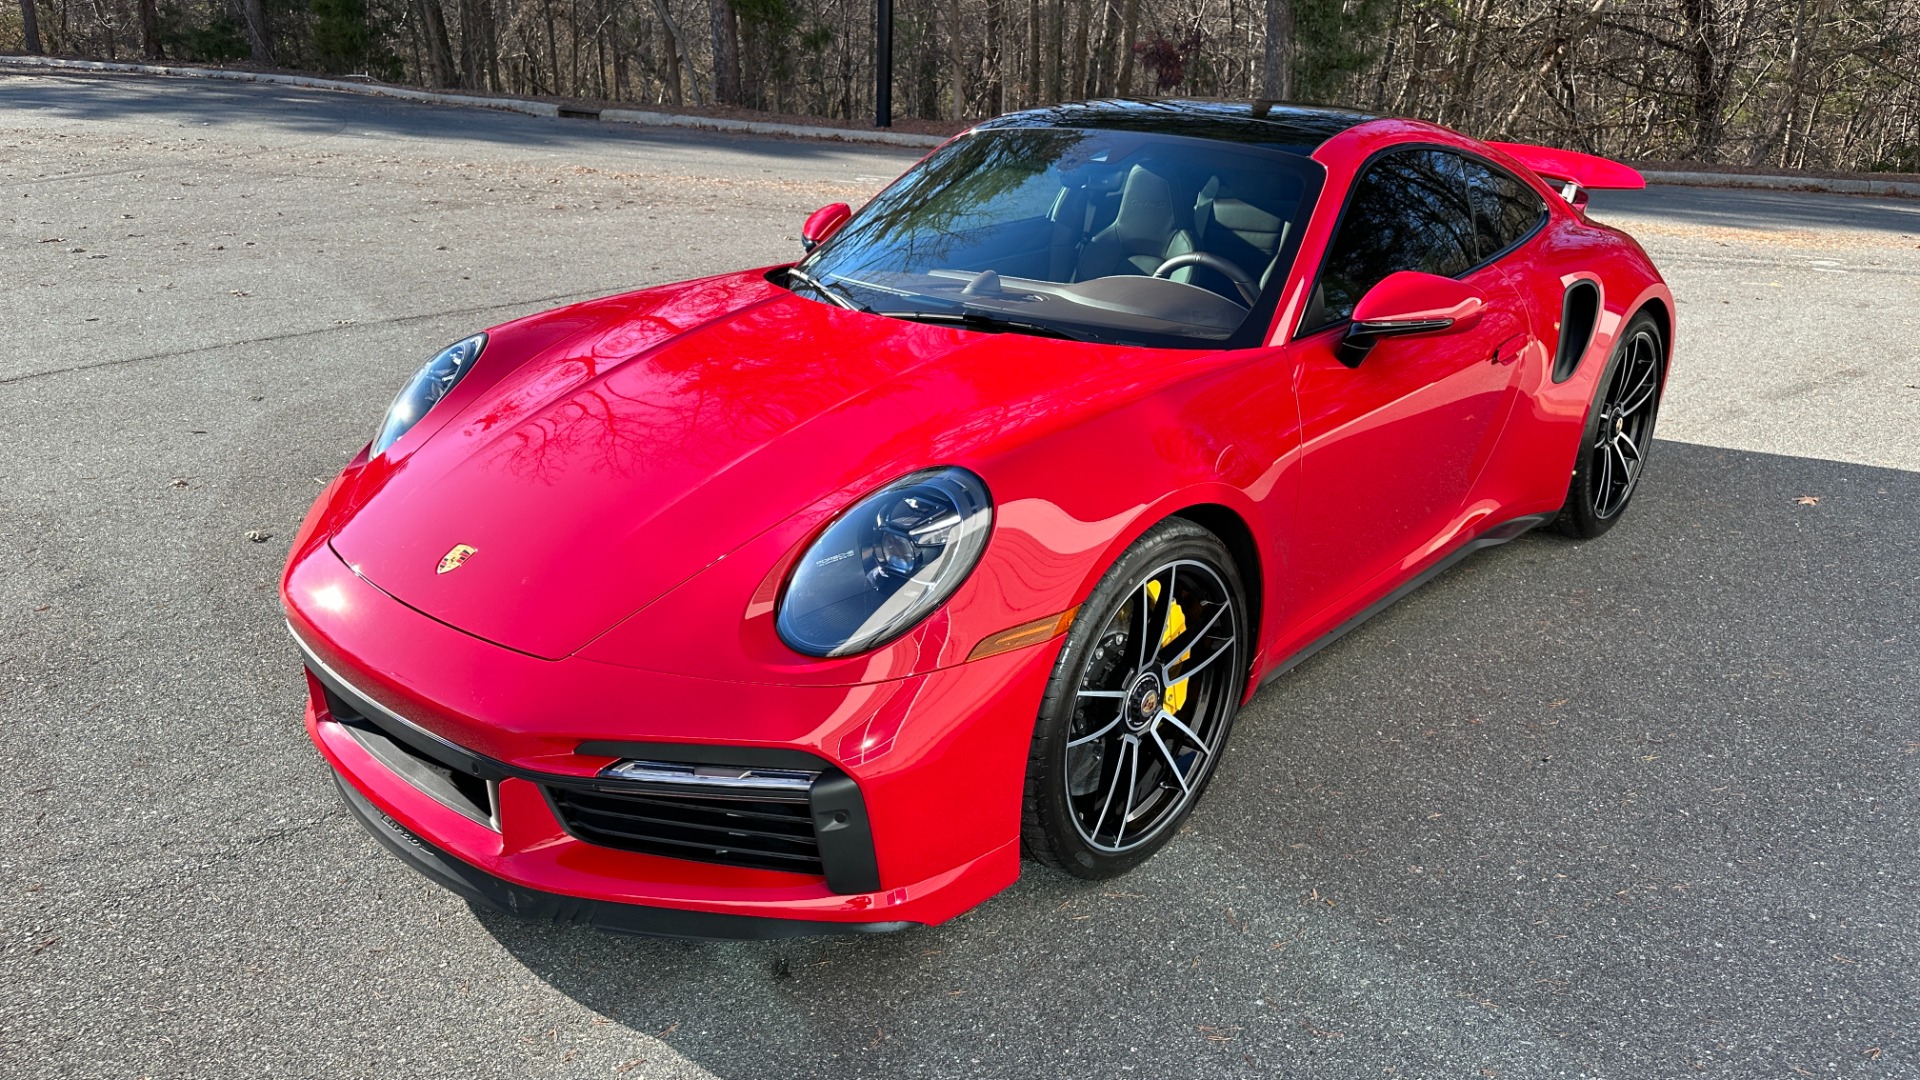 Used 2022 Porsche 911 Turbo S / PAINT PROTECTION / BURMESTER / SPORT EXHAUST / FRONT LIFT for sale $253,000 at Formula Imports in Charlotte NC 28227 6